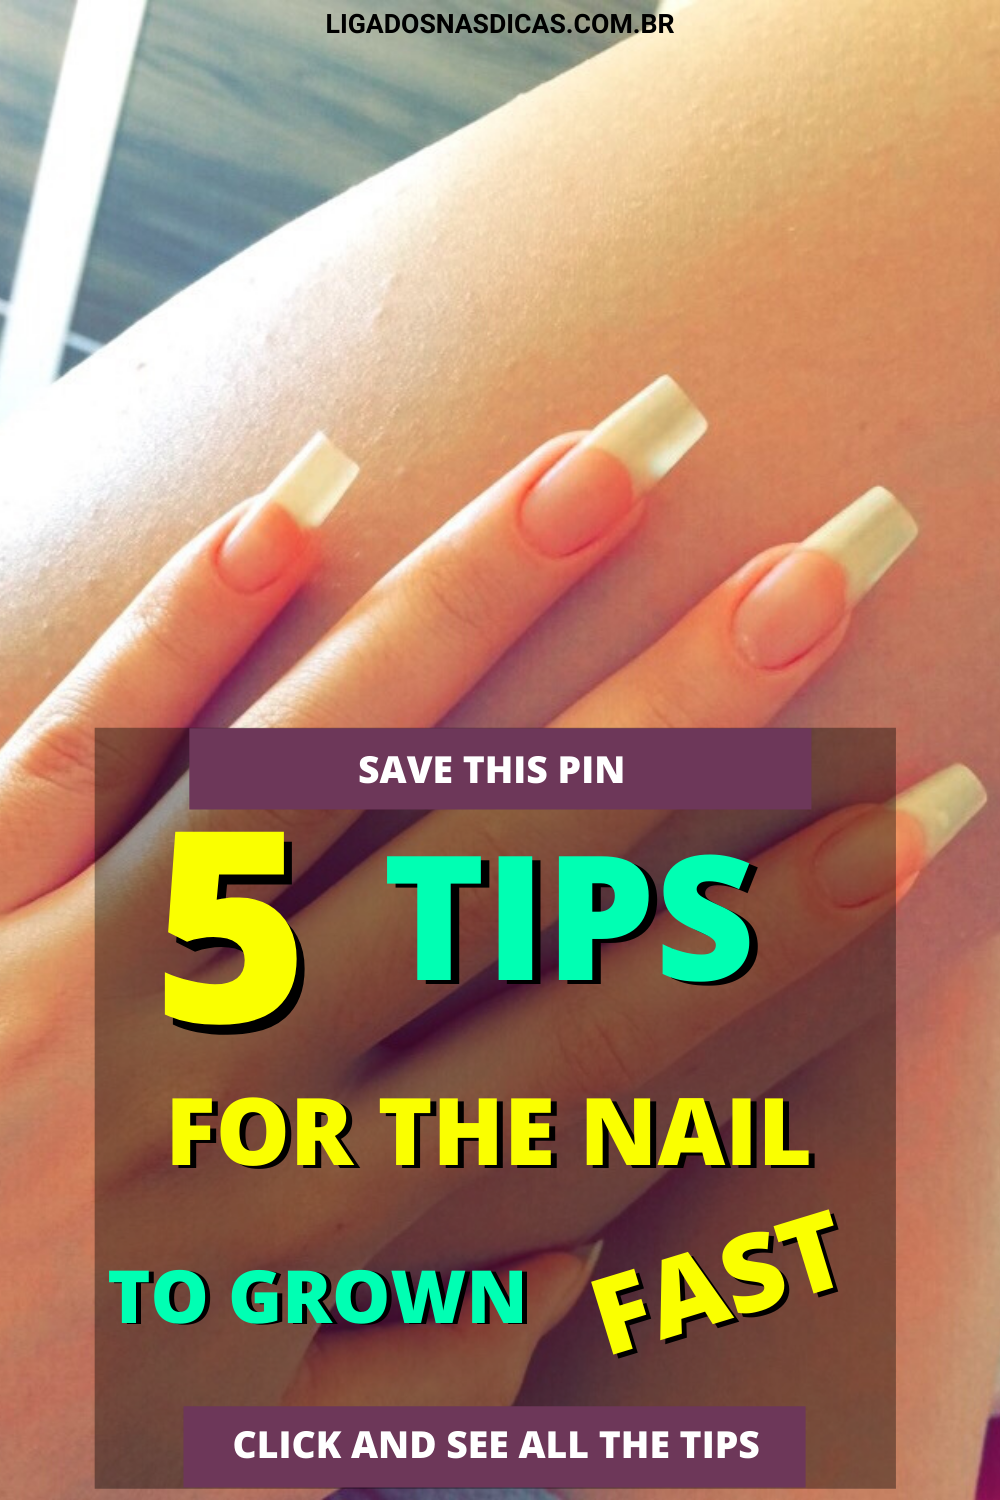 5 tips for the nail to grow fast